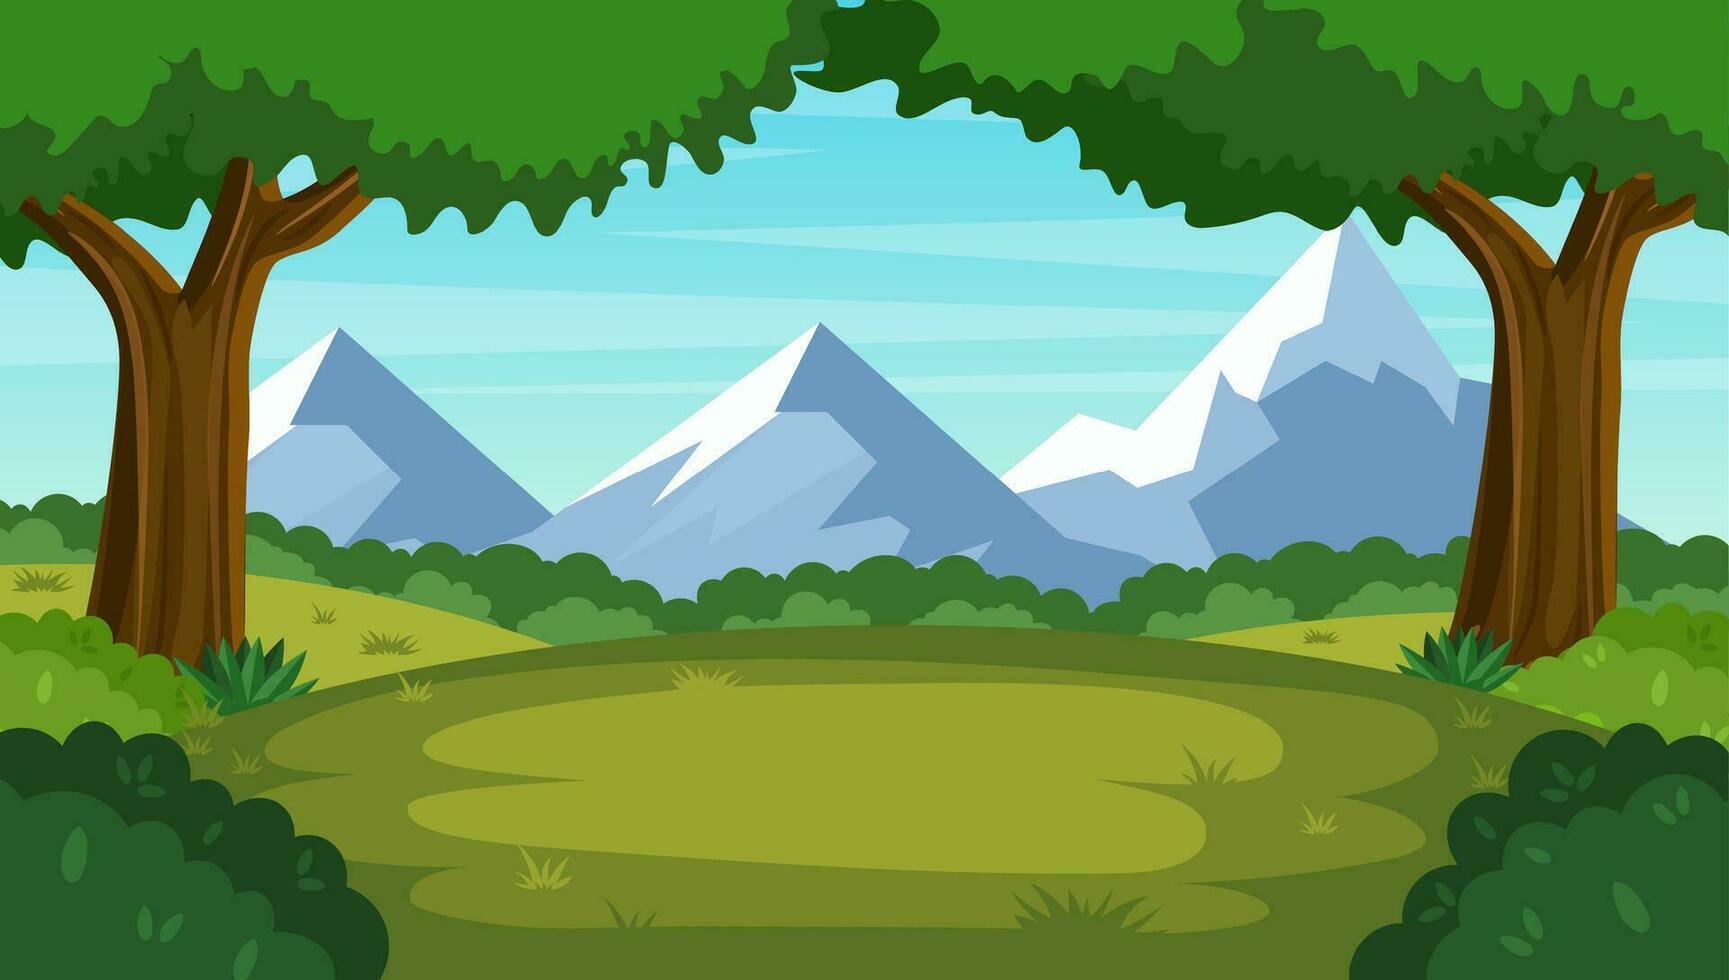 Cartoon forest background, nature landscape with deciduous trees, green grass, bushes,Mountain. Scenery view, summer or spring wood. Vector illustration in flat style